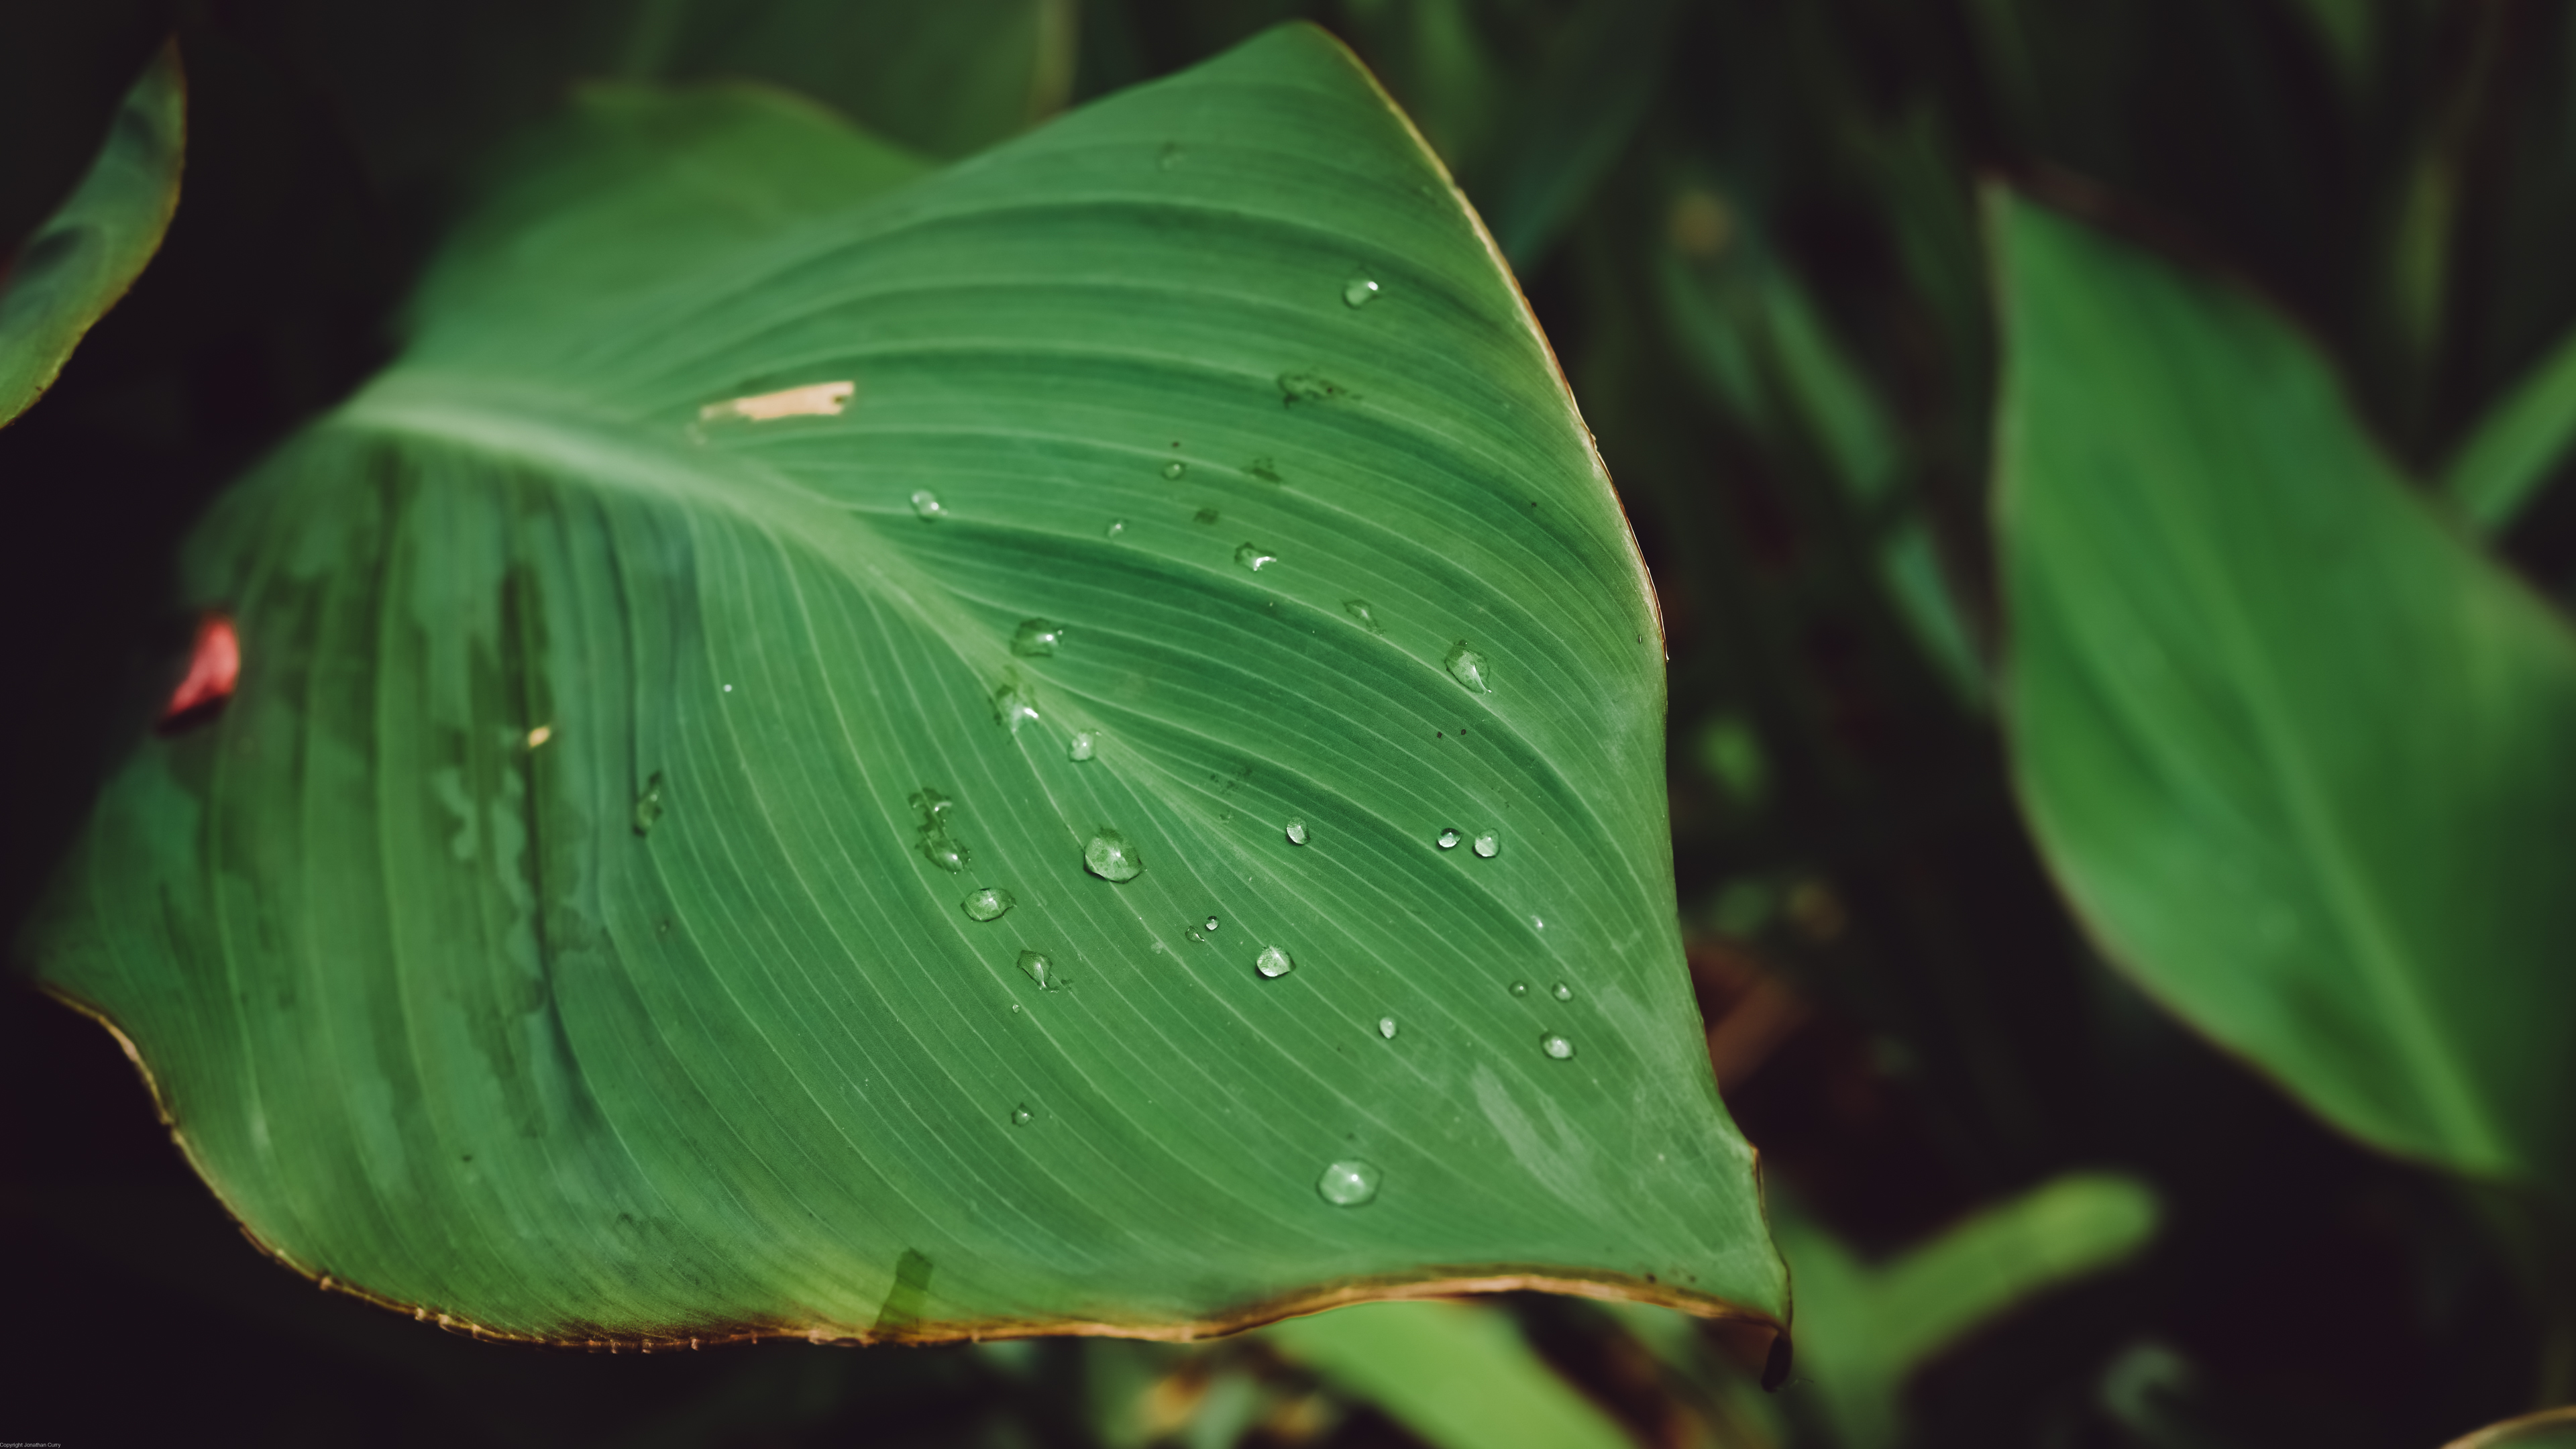 General 3840x2160 plants nature leaves outdoors photography dew 50mm Botanical garden closeup water drops water green blurred blurry background watermarked Jonathan Curry